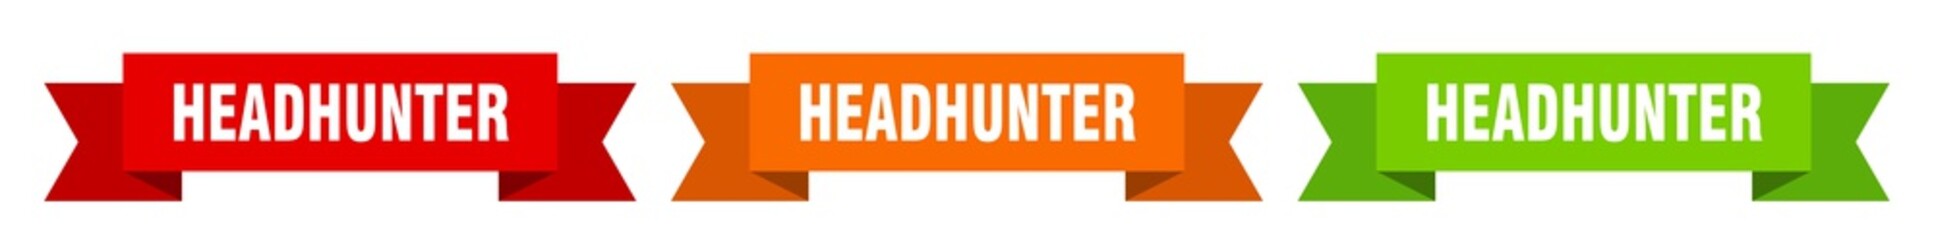 headhunter ribbon. headhunter isolated paper sign. banner